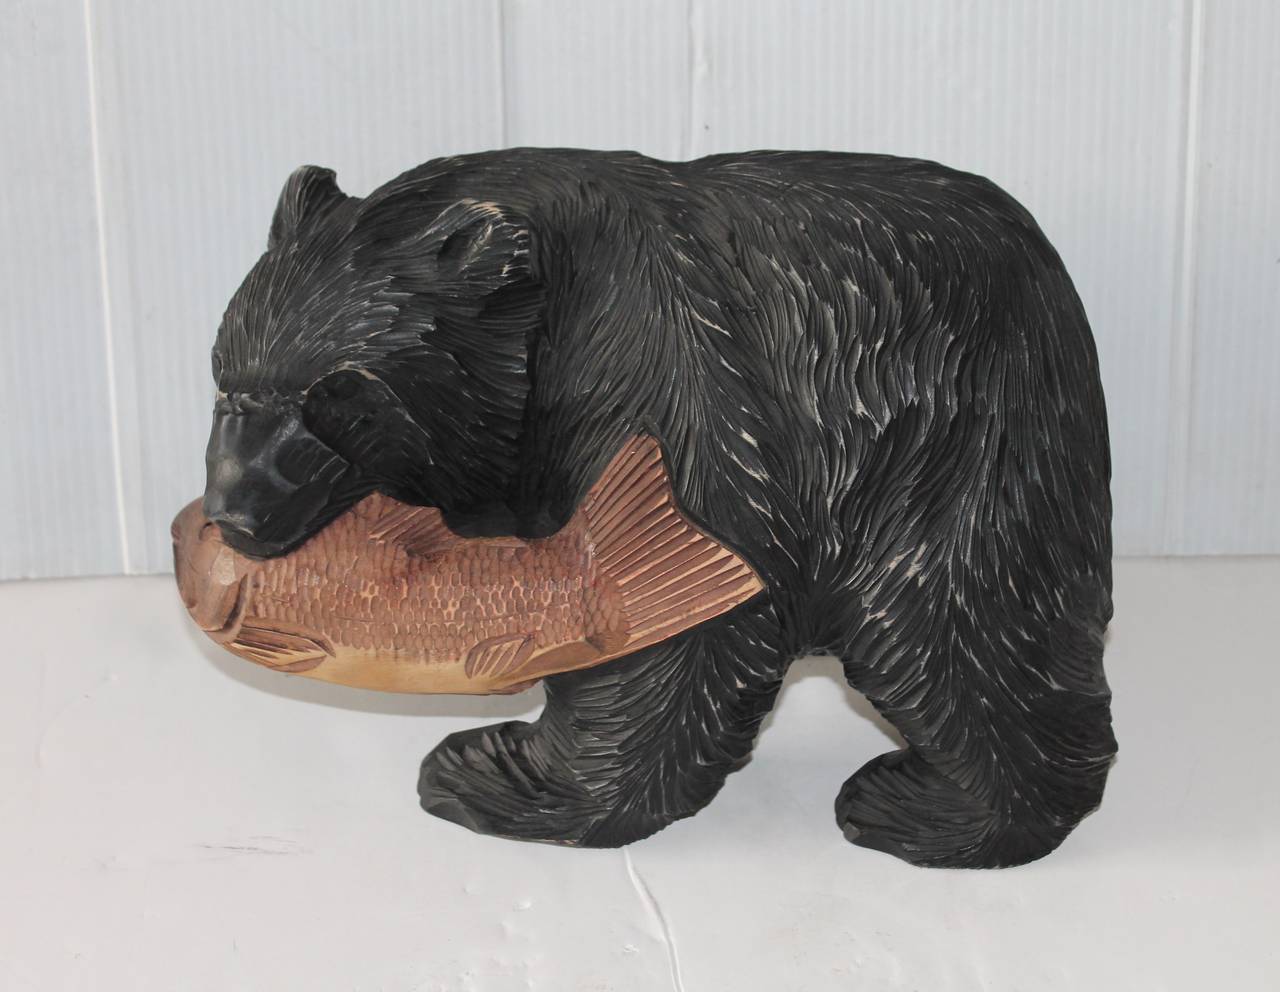 This hand-carved black bear with a fish in its mouth is in wonderful condition with wear consistent with age. We have had these bears in the past that were unpainted and this makes this one a little more unique. It is unsigned.